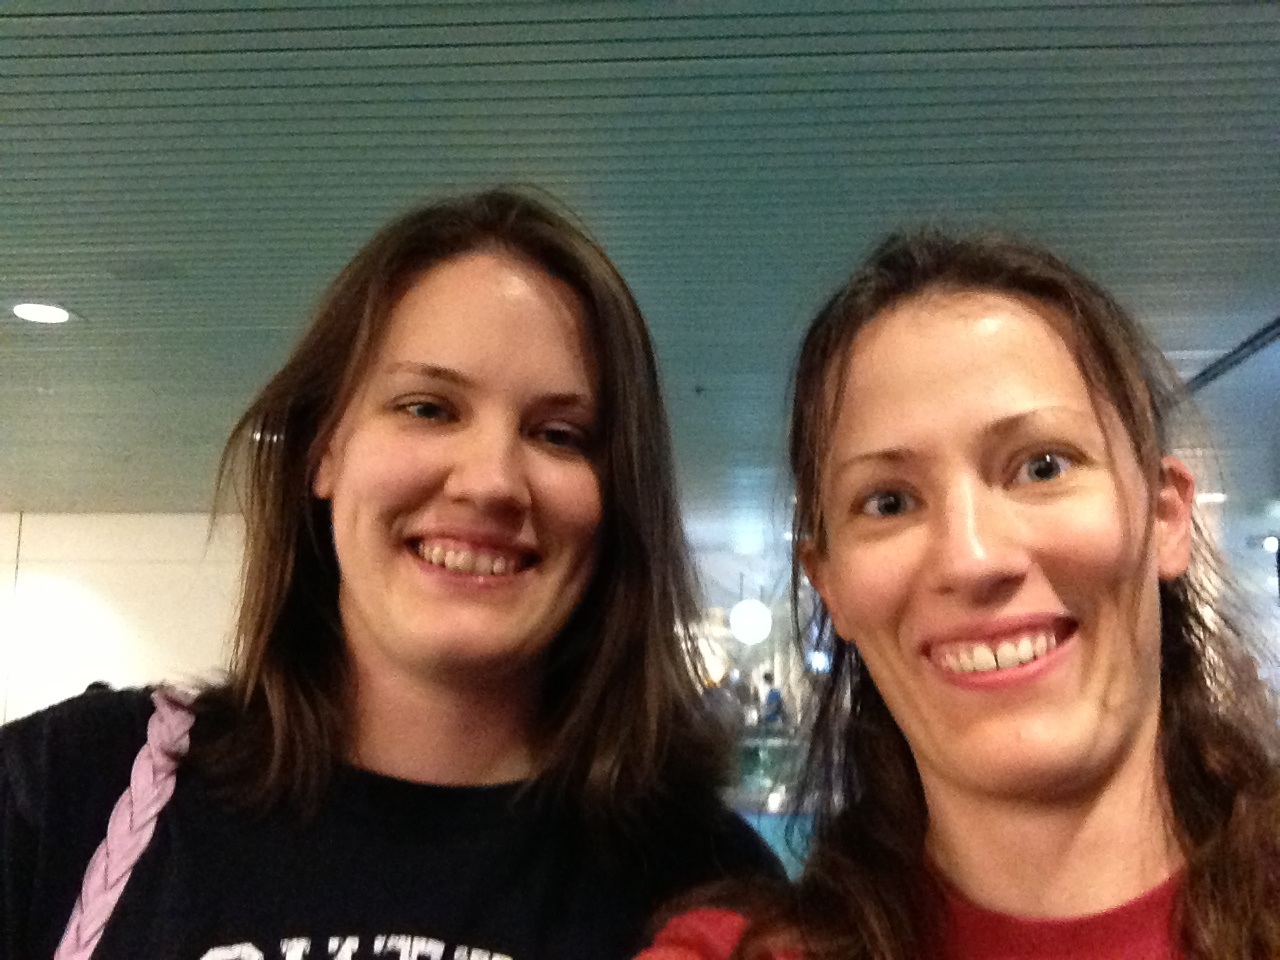 My sis and me, tired, hungry, and a bit bedraggled, but overjoyed to see each other at the airport!